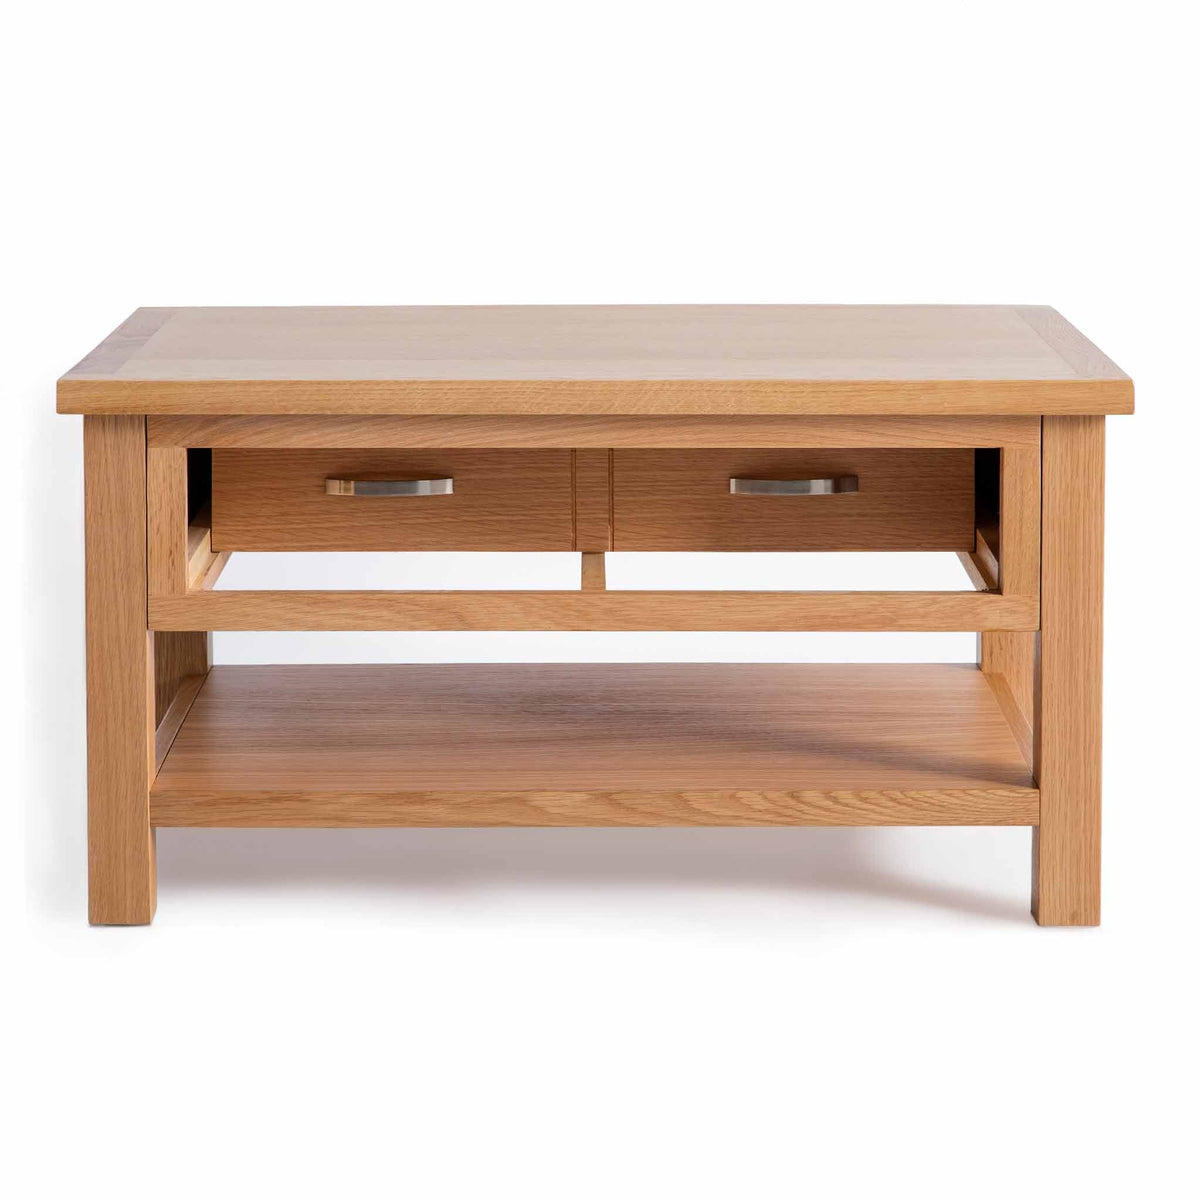 London Oak Coffee Table with Drawer - Front View with Drawer Pushed Back